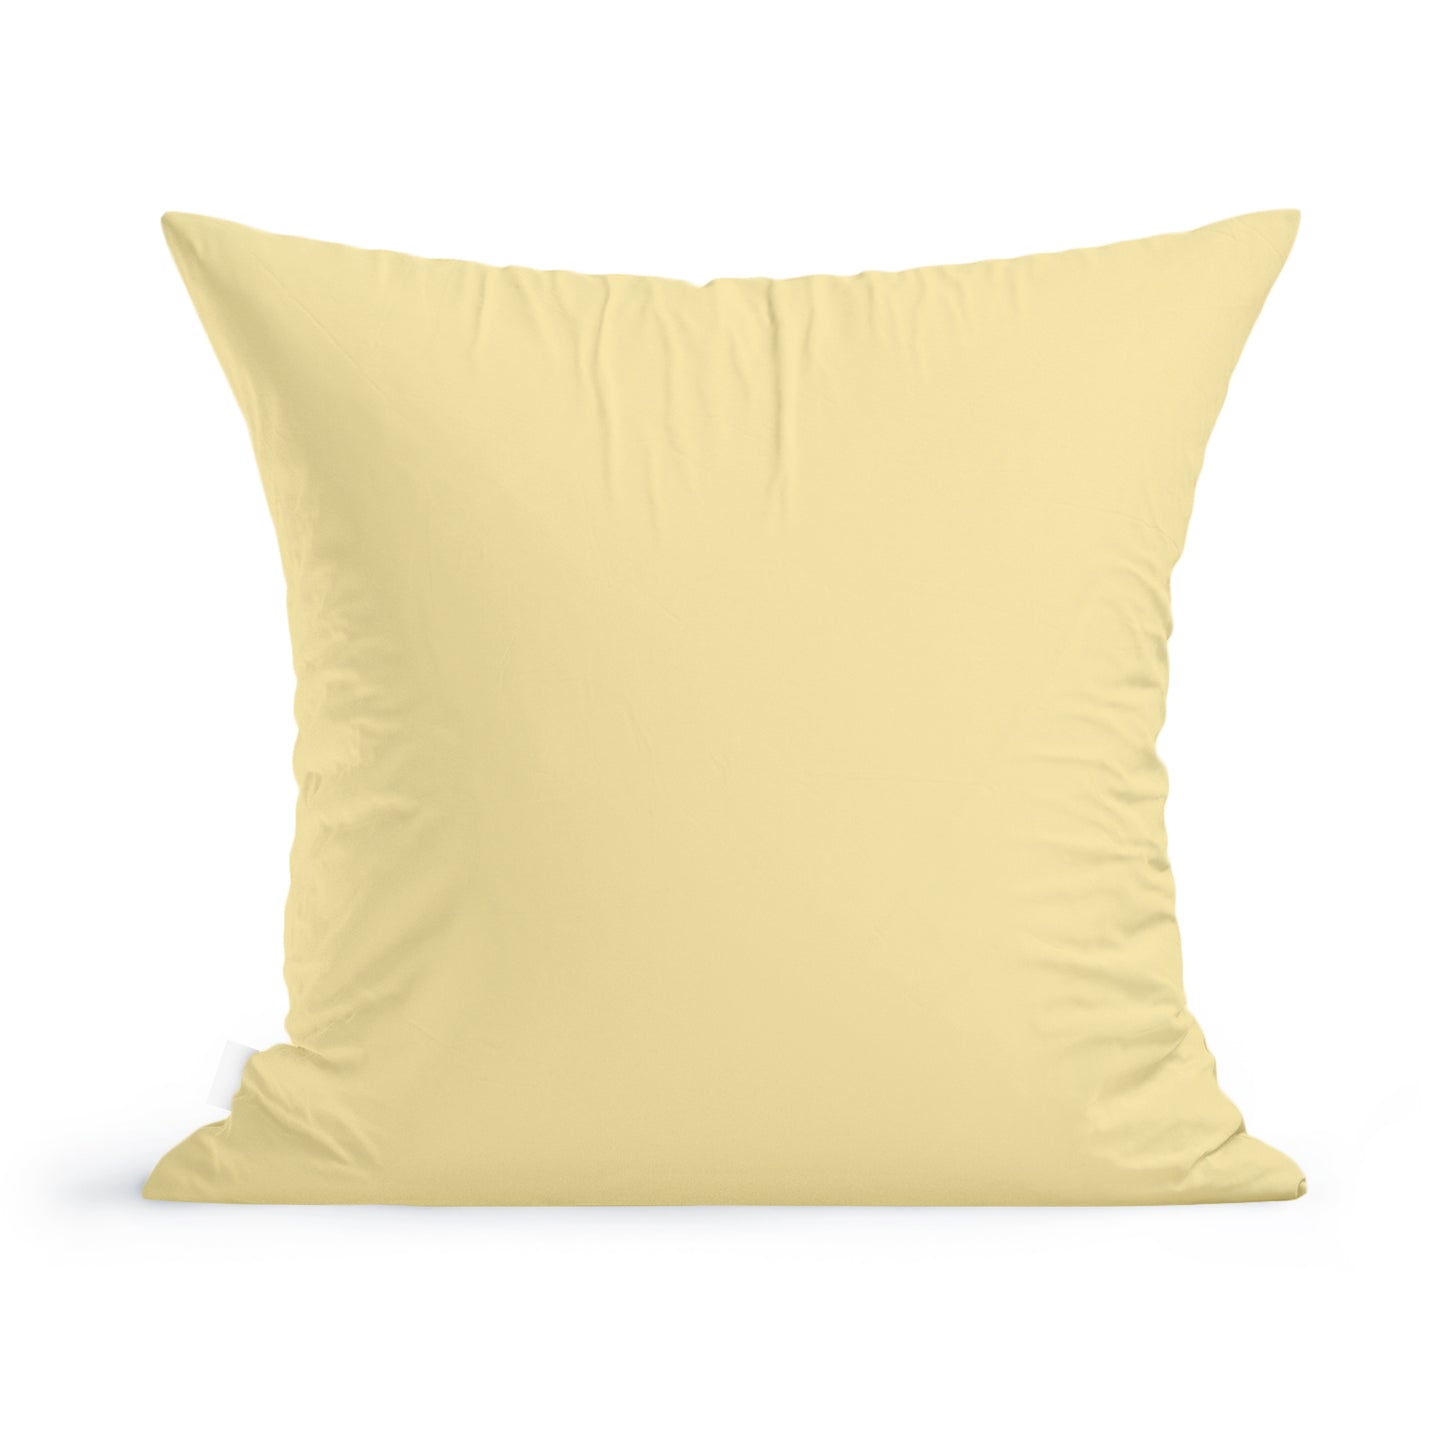 A plain Rustic County Sunflowers Pillow displayed against a white background. The pillow is square-shaped and appears soft and comfortable.